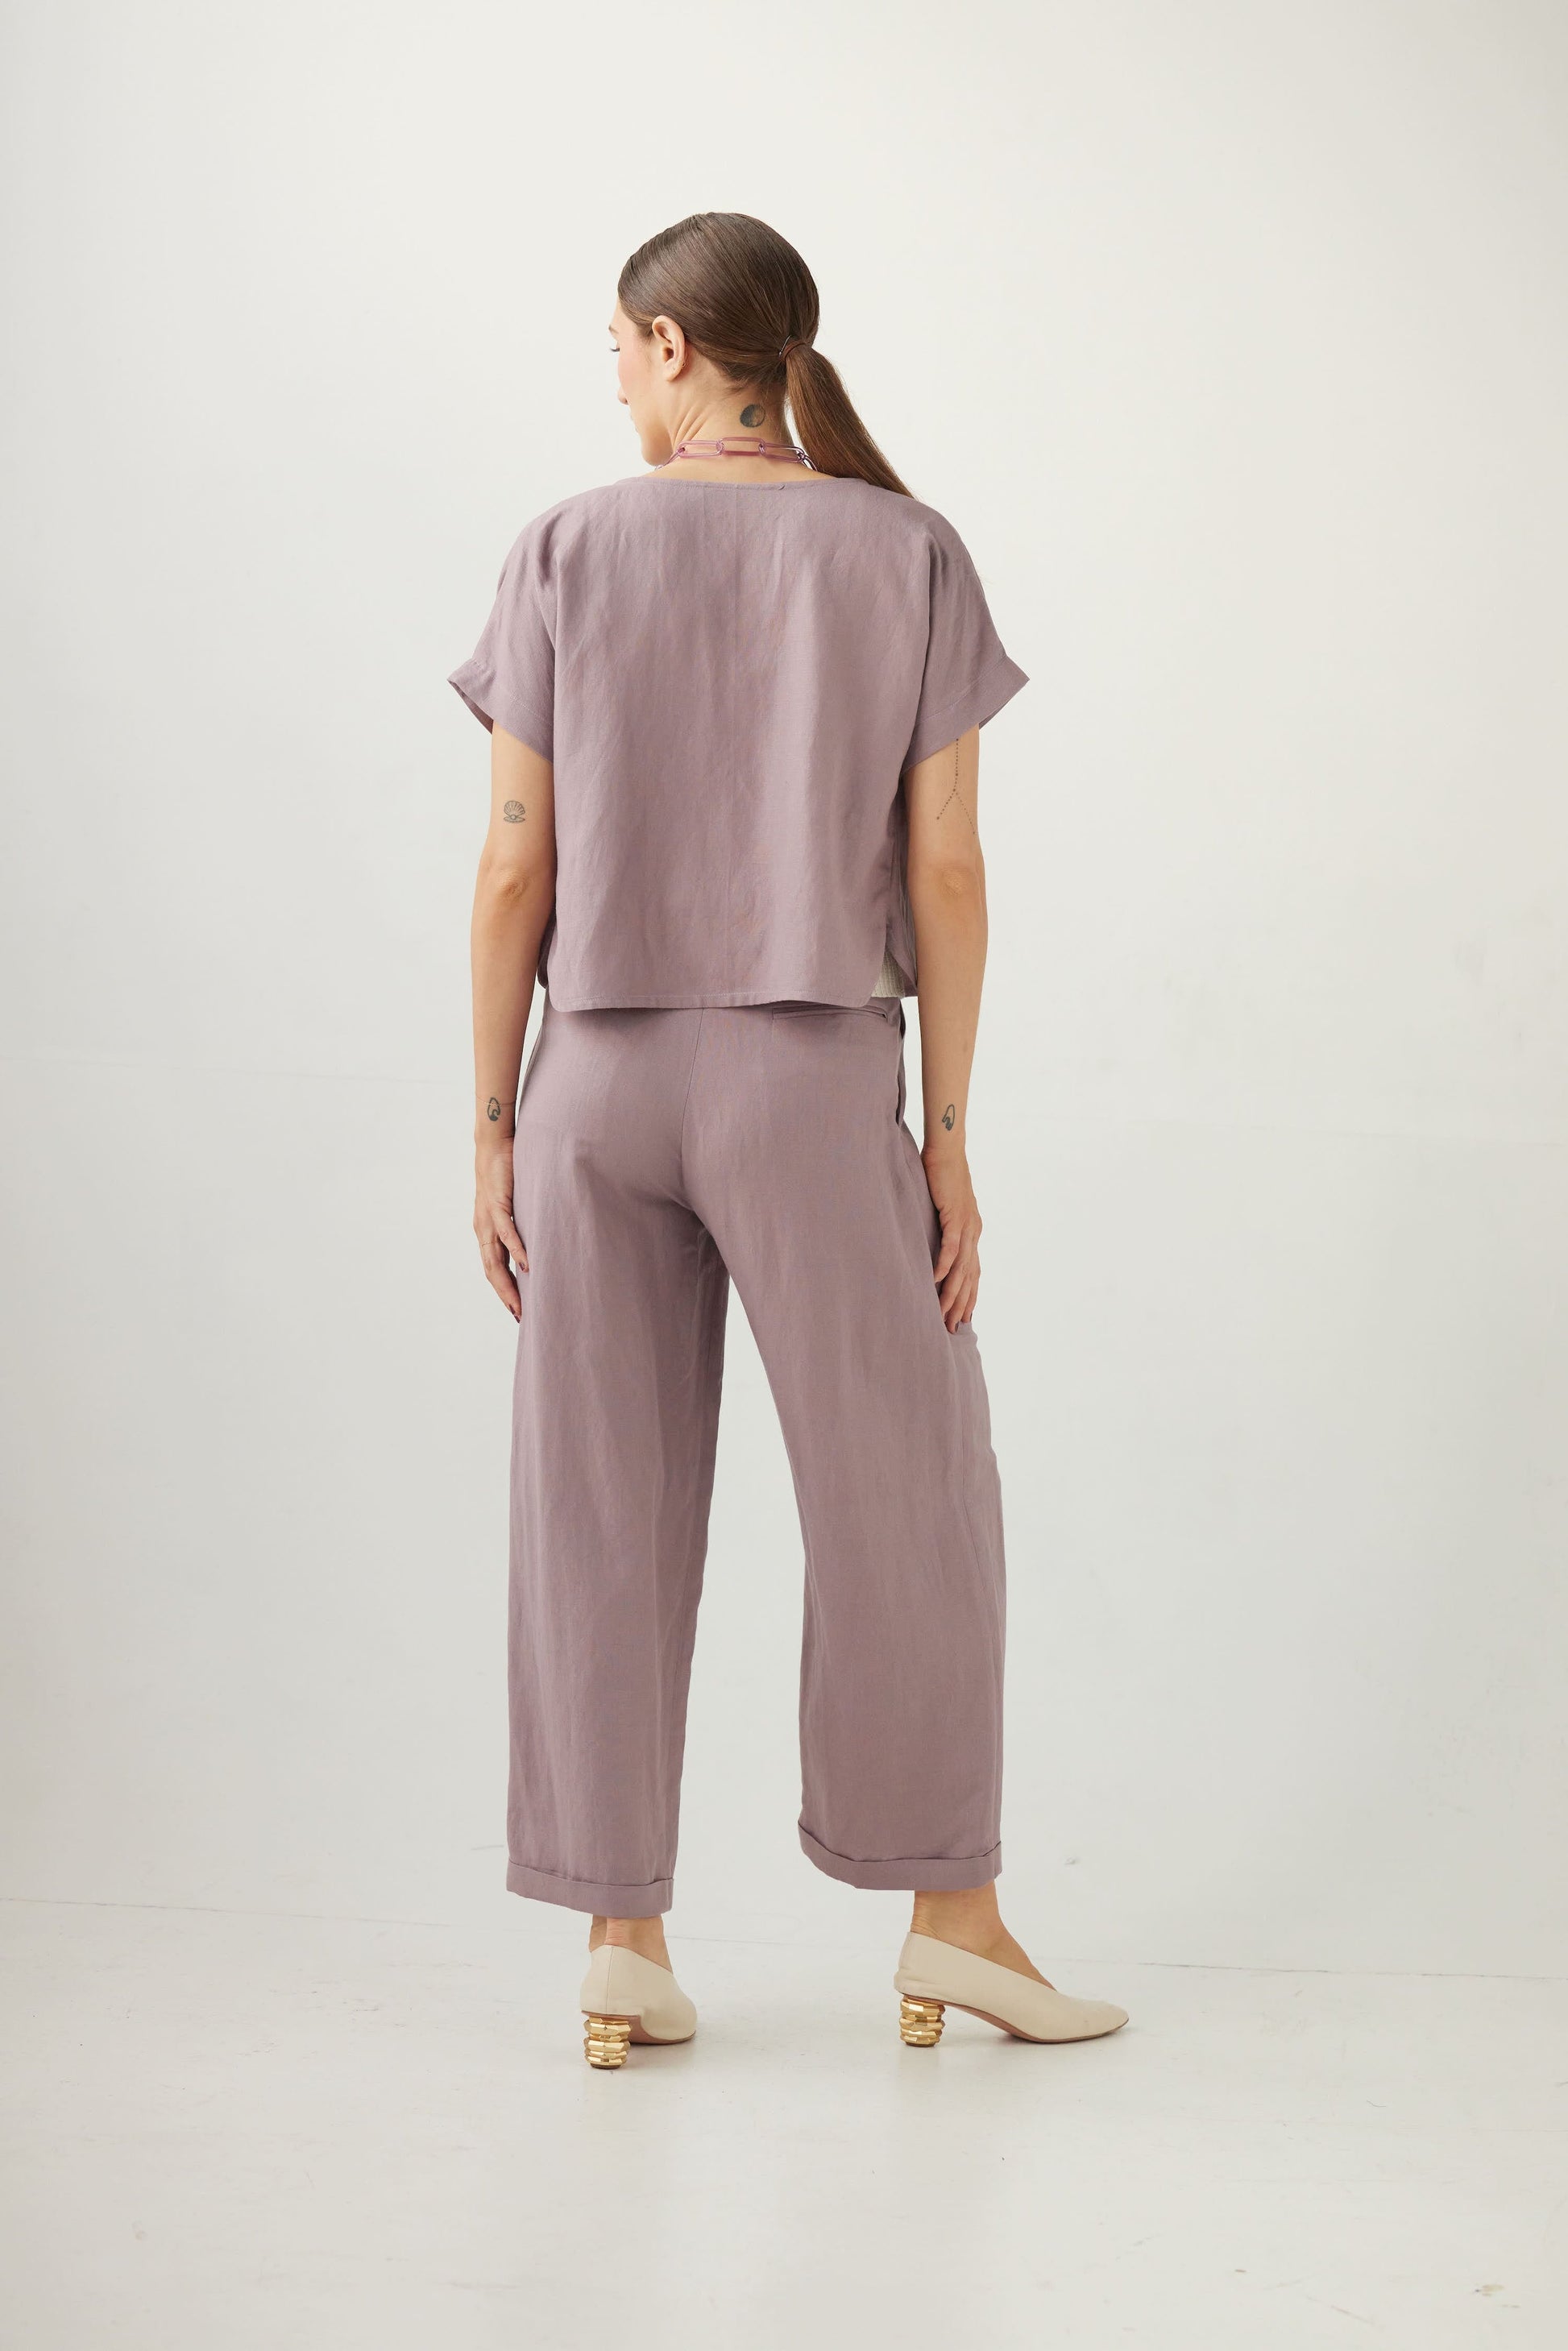 Charlie Pant in Linen Blend Pants CHRISTINE ALCALAY   